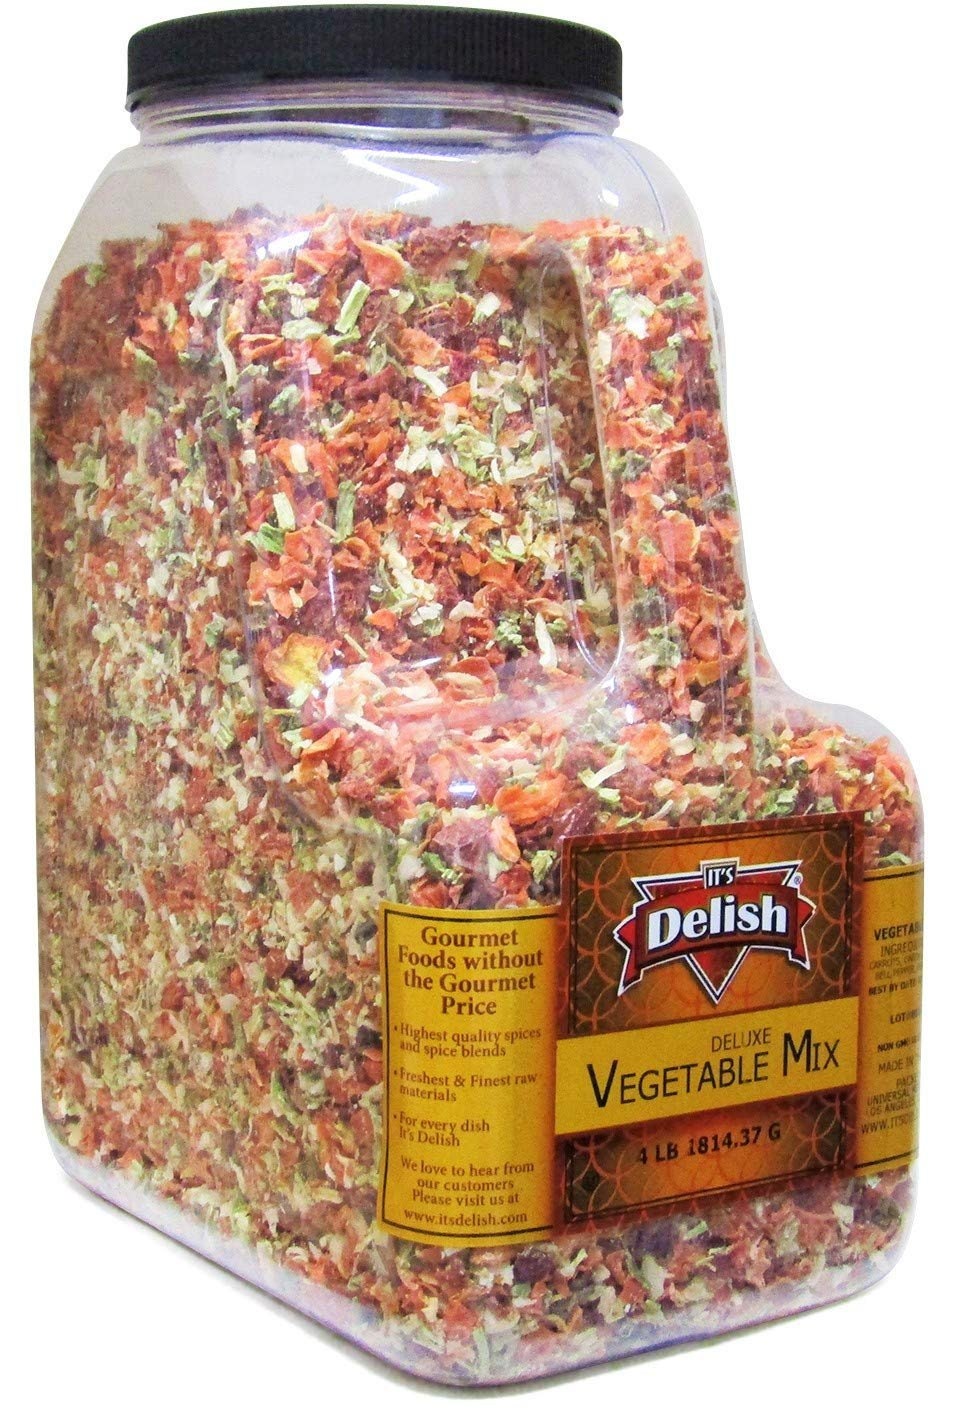 Deluxe Dried Vegetable Soup Mix By Its Delish, 4 lb Restaurant Gallon Size Jug With Handle | Premium Blend Of Dehydrated Vegetables